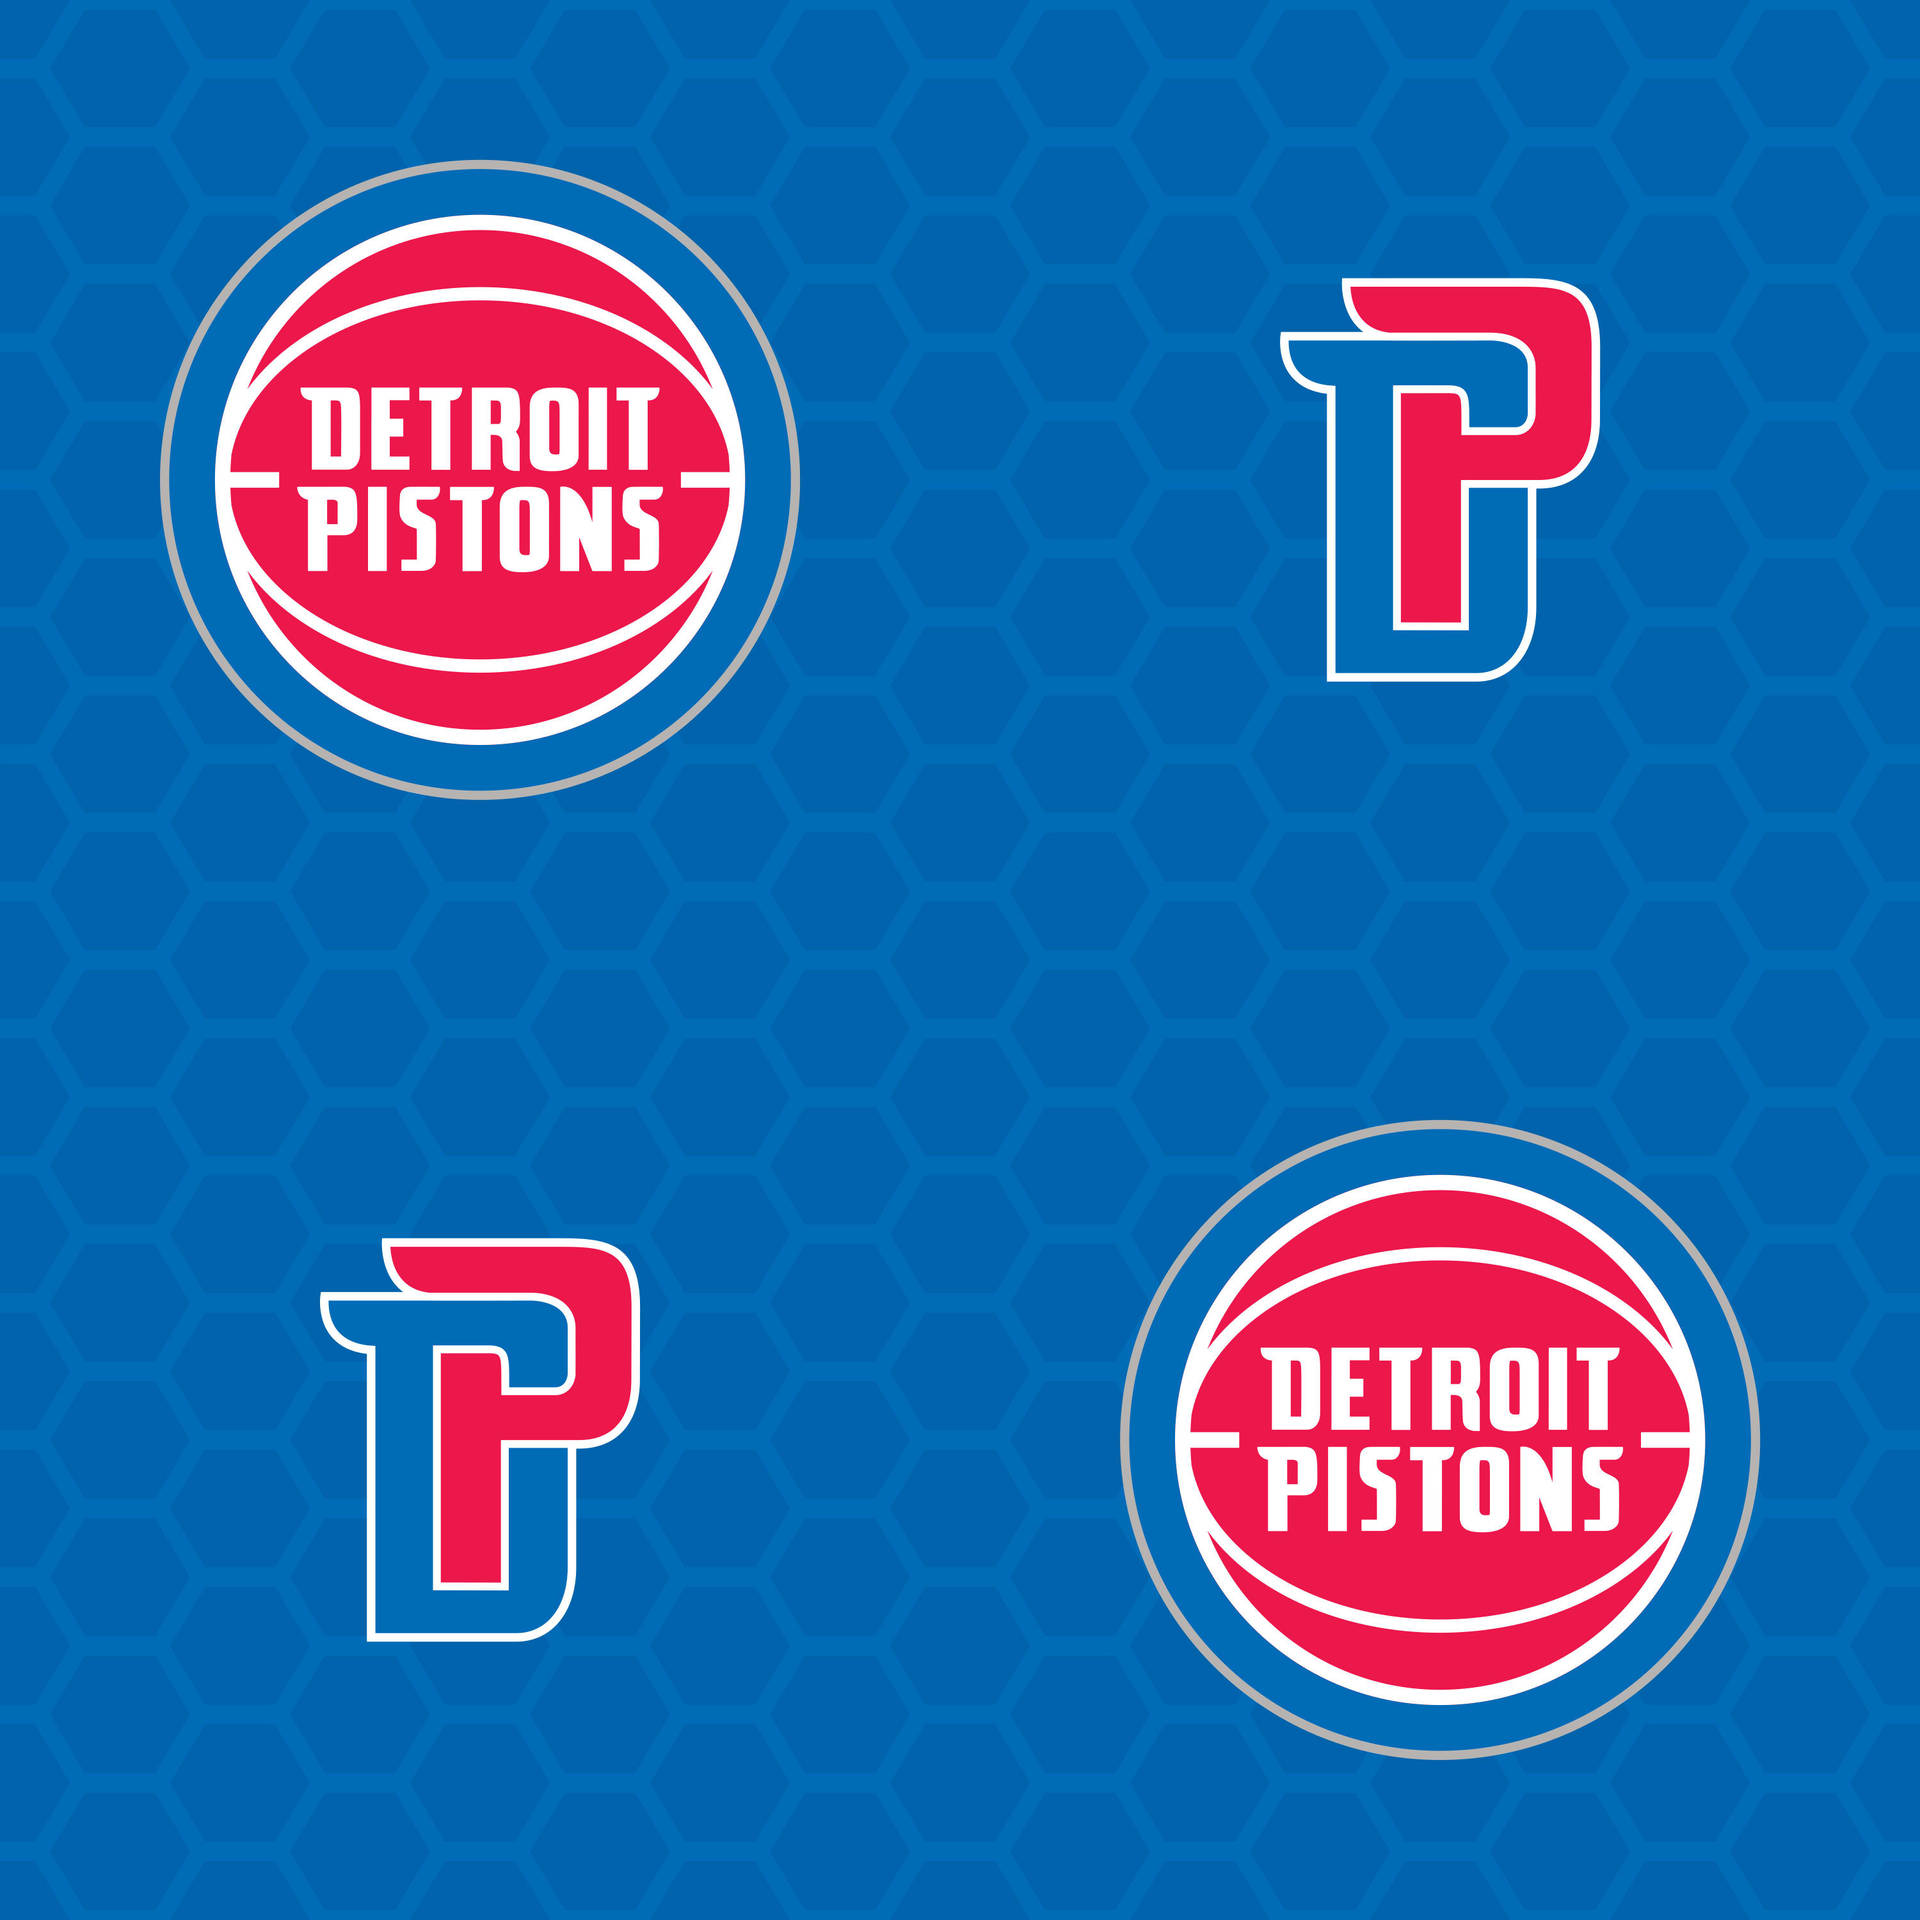 Detroit Pistons In Action On Court Background